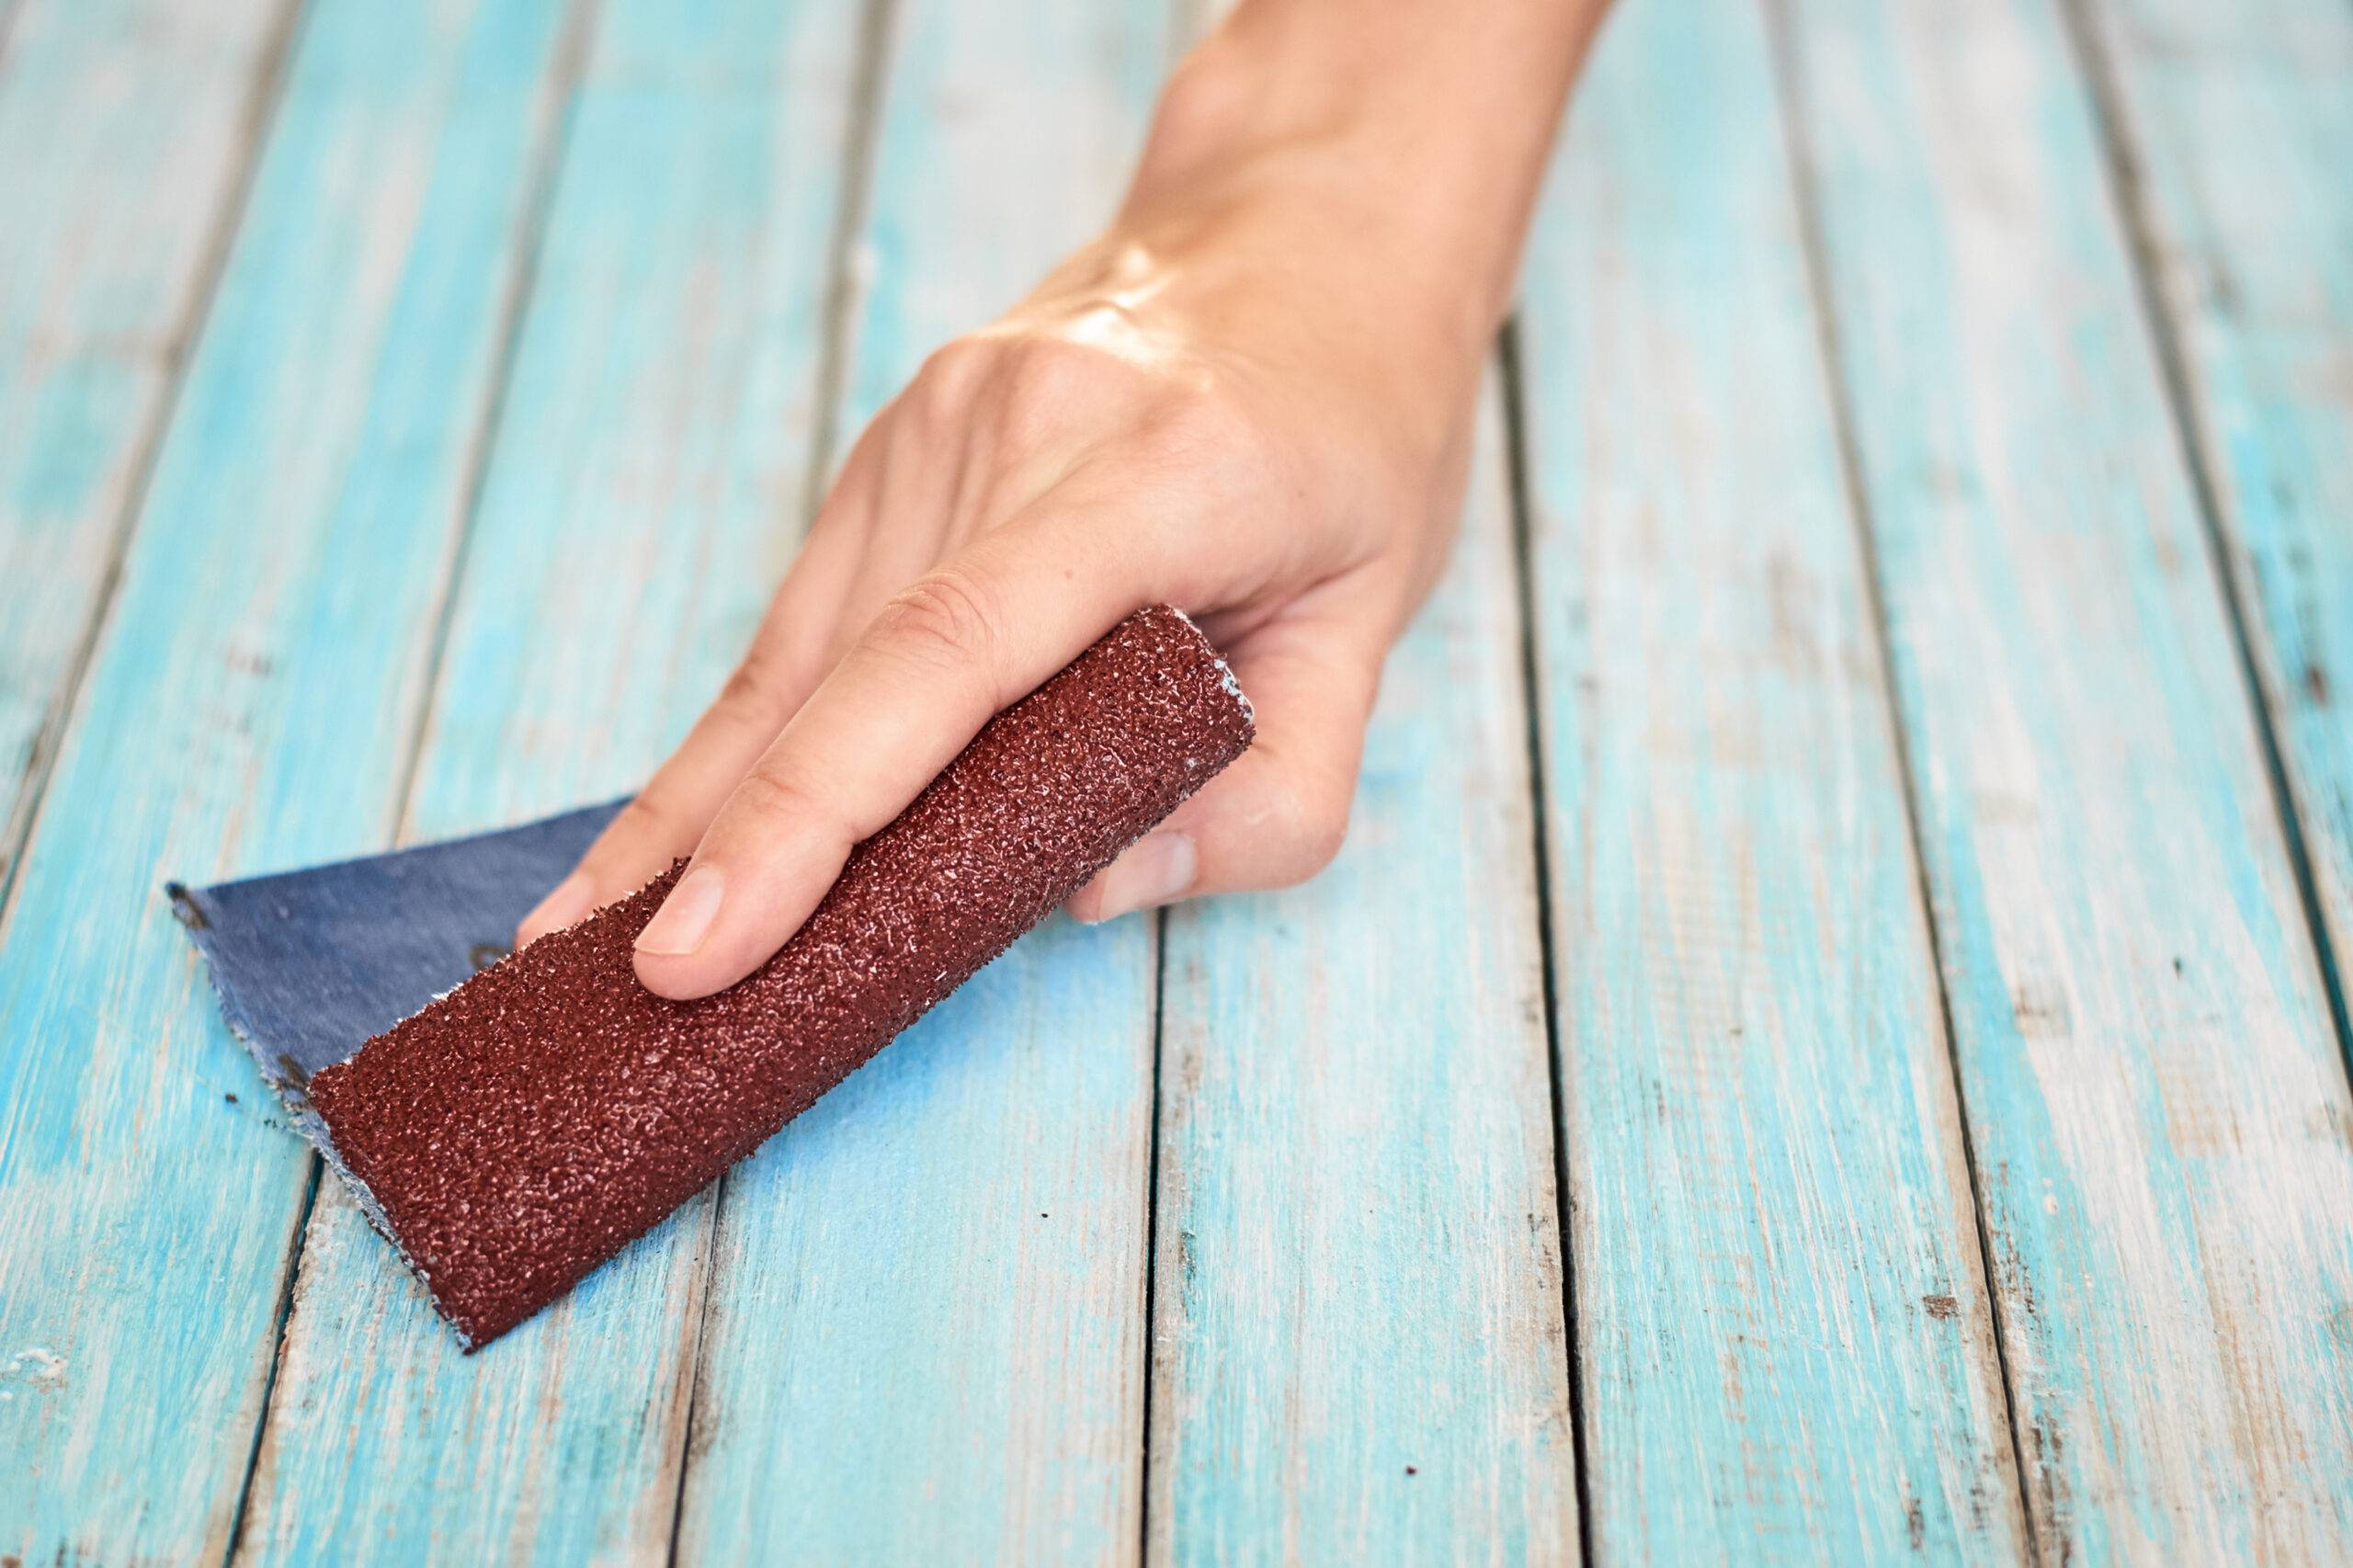 Hands sanding blue paint off wooden boards with sandpaper